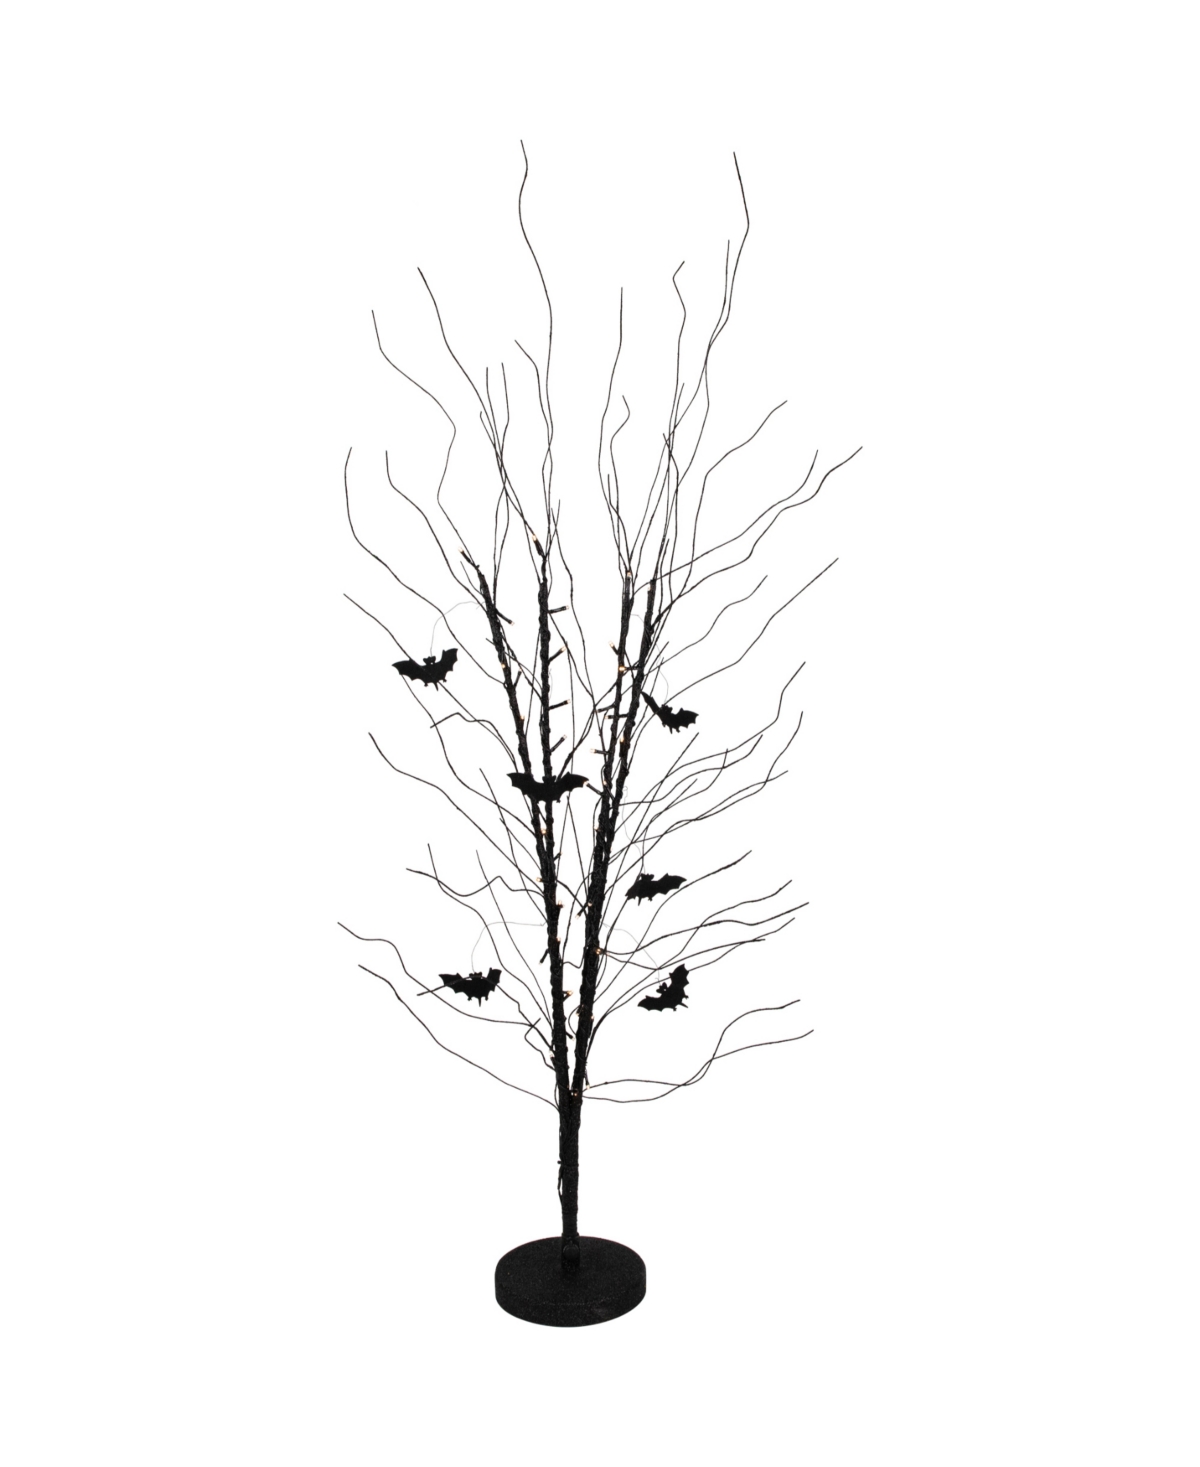 50" Led Lighted Black Halloween Branch Tree with Bats Warm White Lights - Black